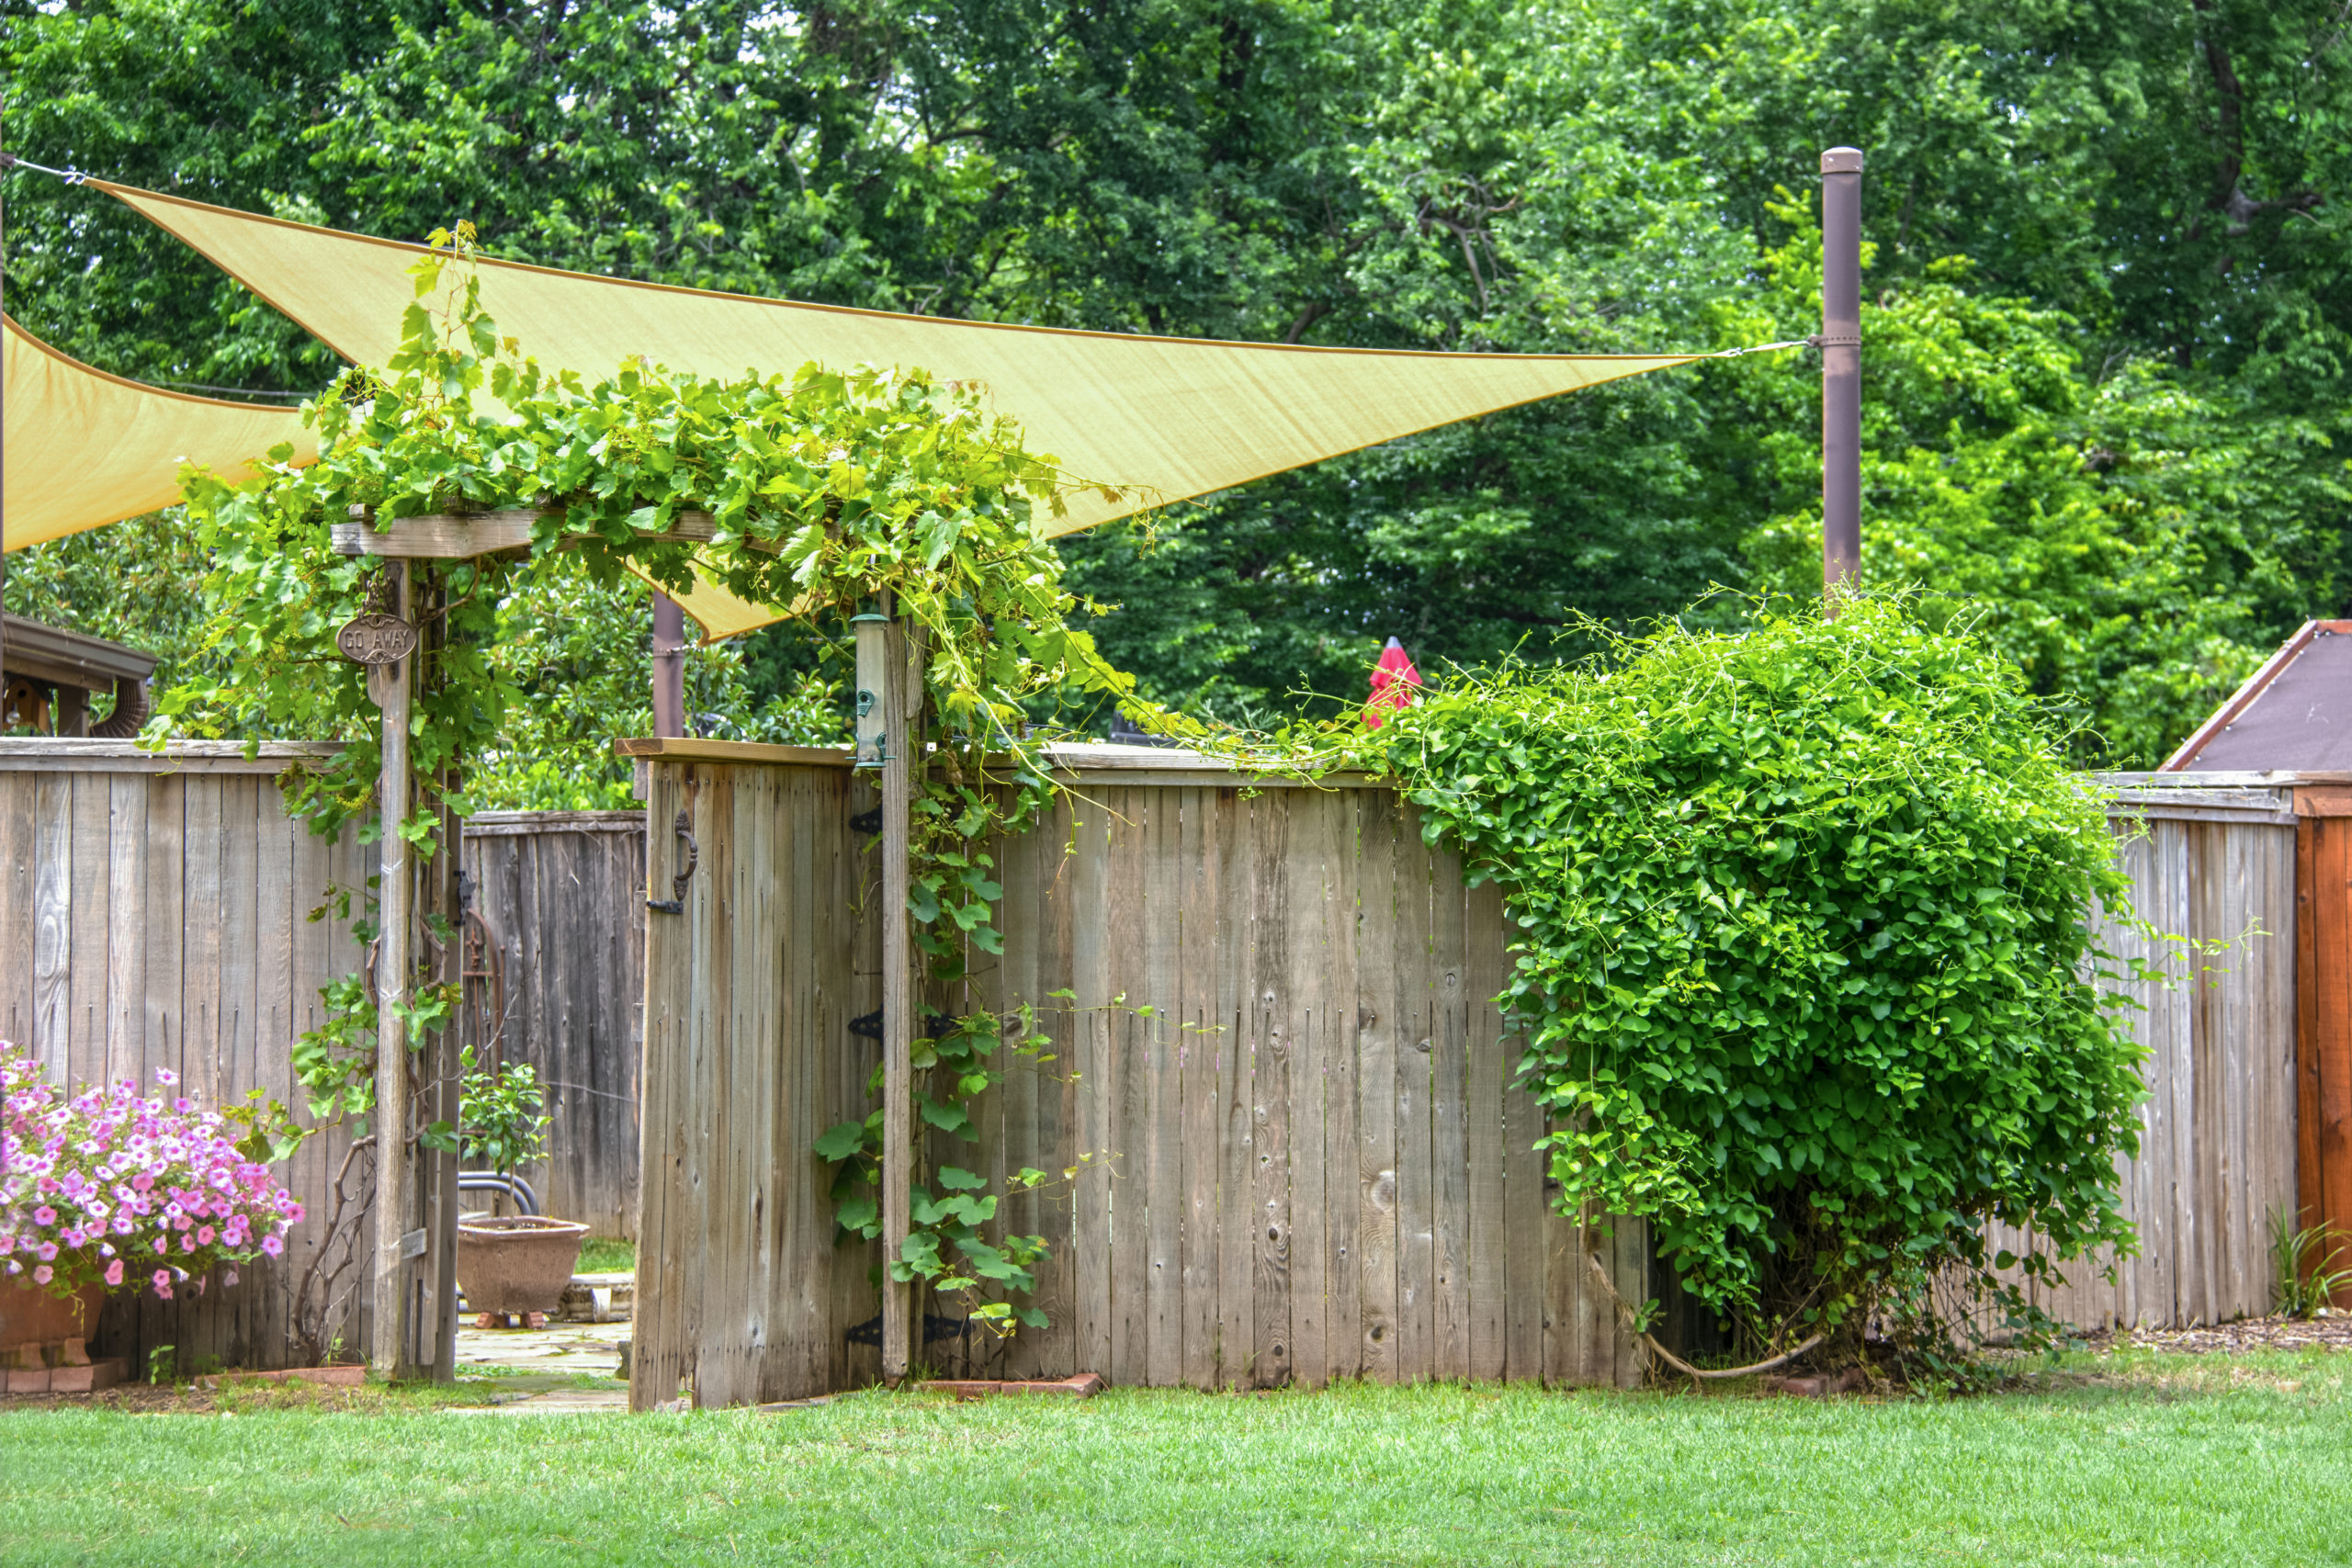 Garden or party area shaded by sails and an umbrella behind privacy fence with open gate with vines growing on a trellis and on rustic fence and flowers outside